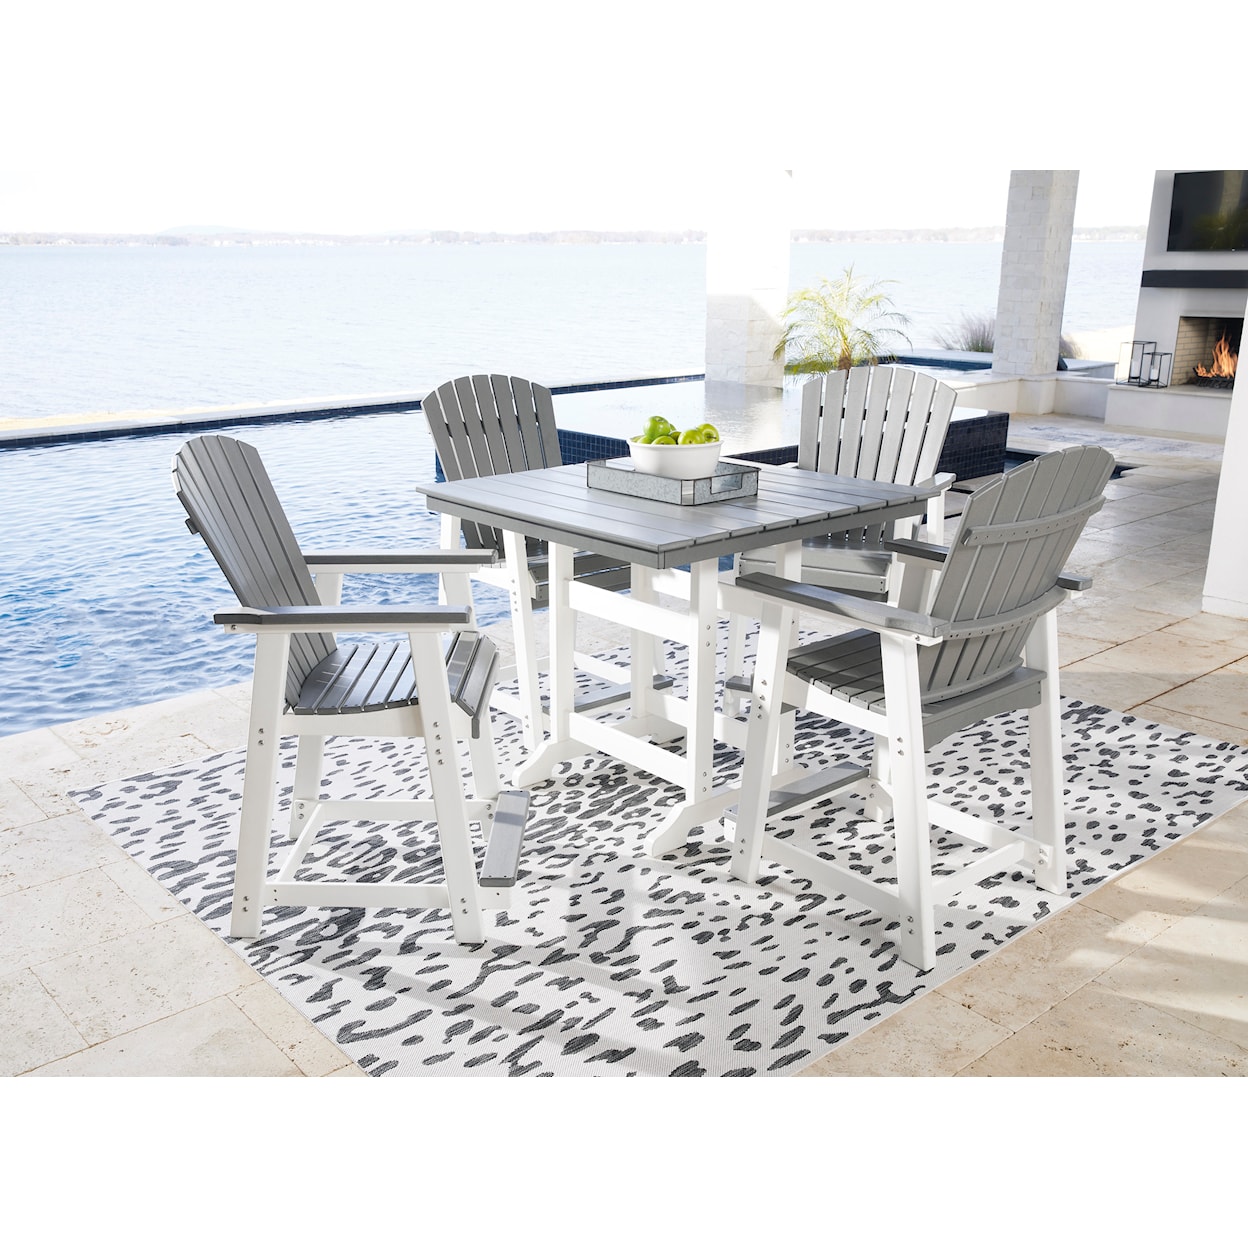 Signature Transville Outdoor Counter Height Dining Table